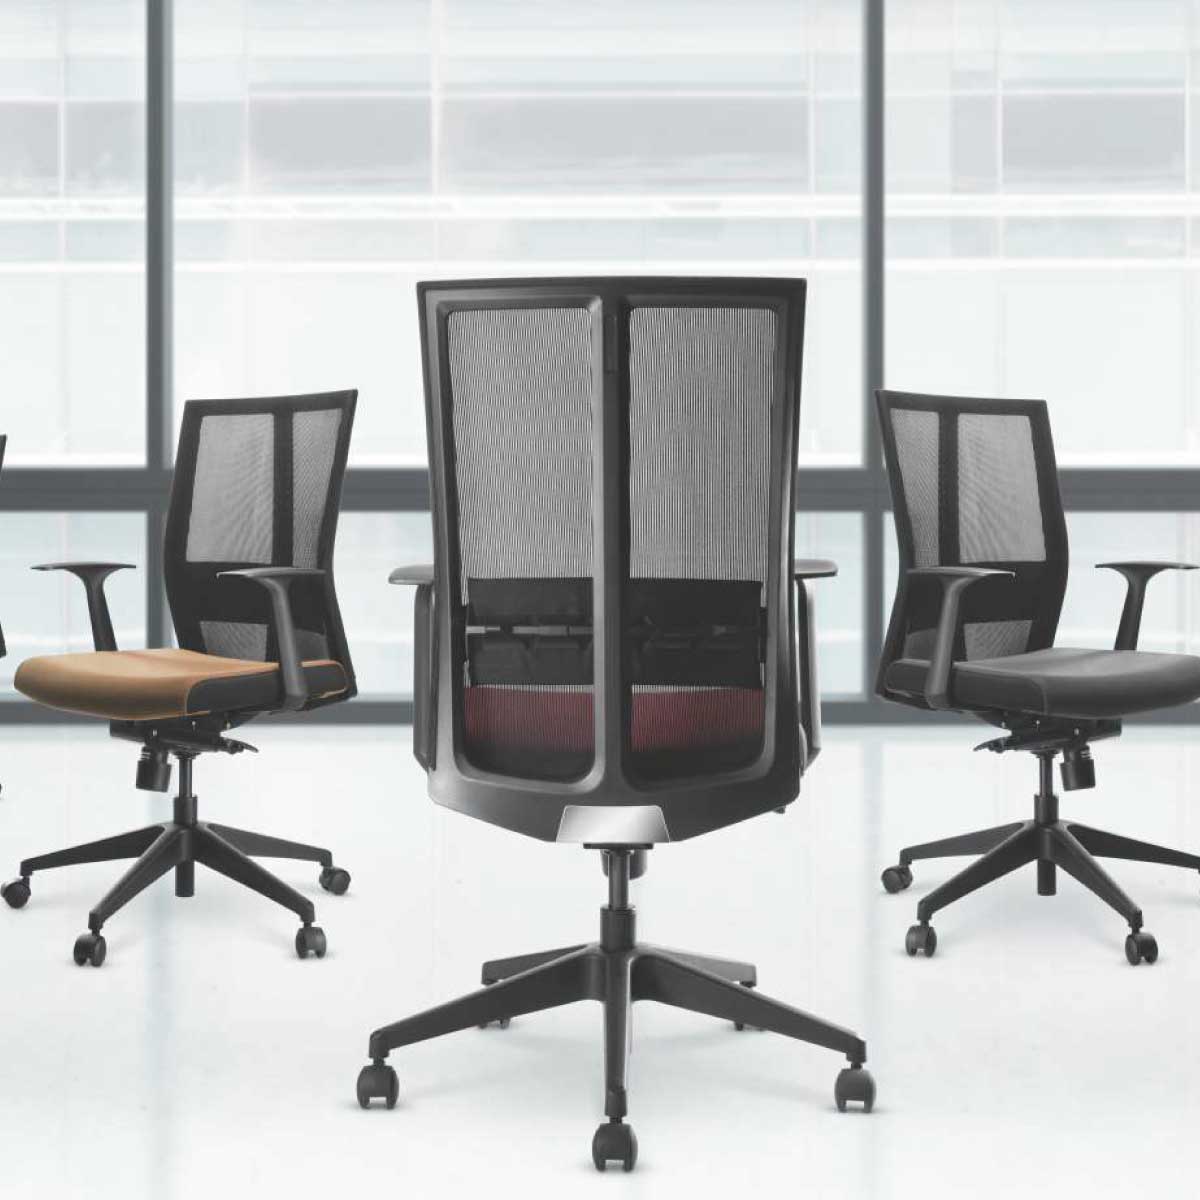 Visitor Chair Manufacturers, Suppliers, Exporters in Delhi